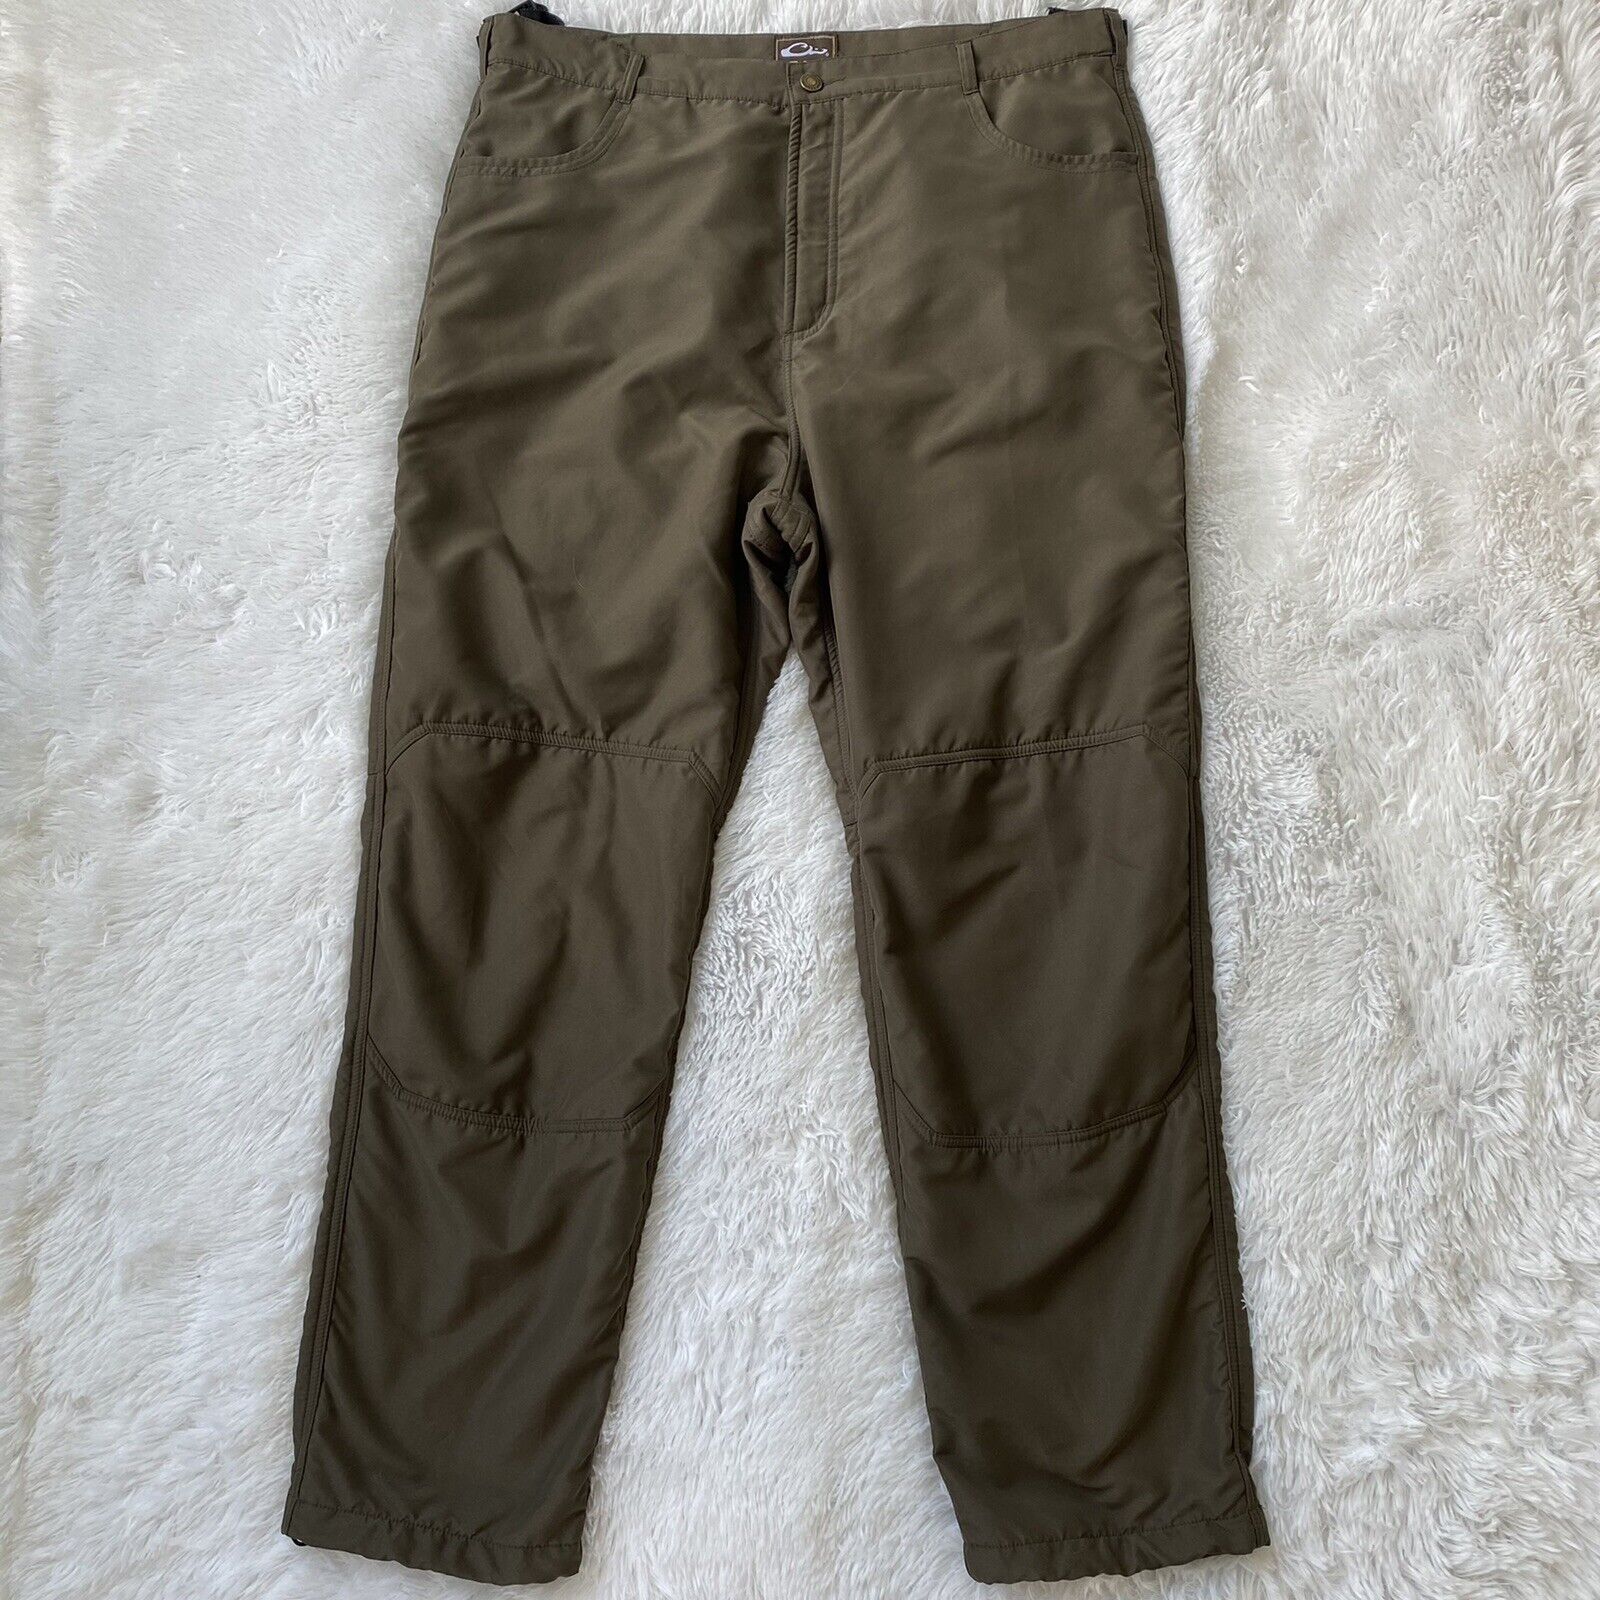 Drake Waterfowl Systems Size Large 36-38 Lined Wader Pants Olive Green